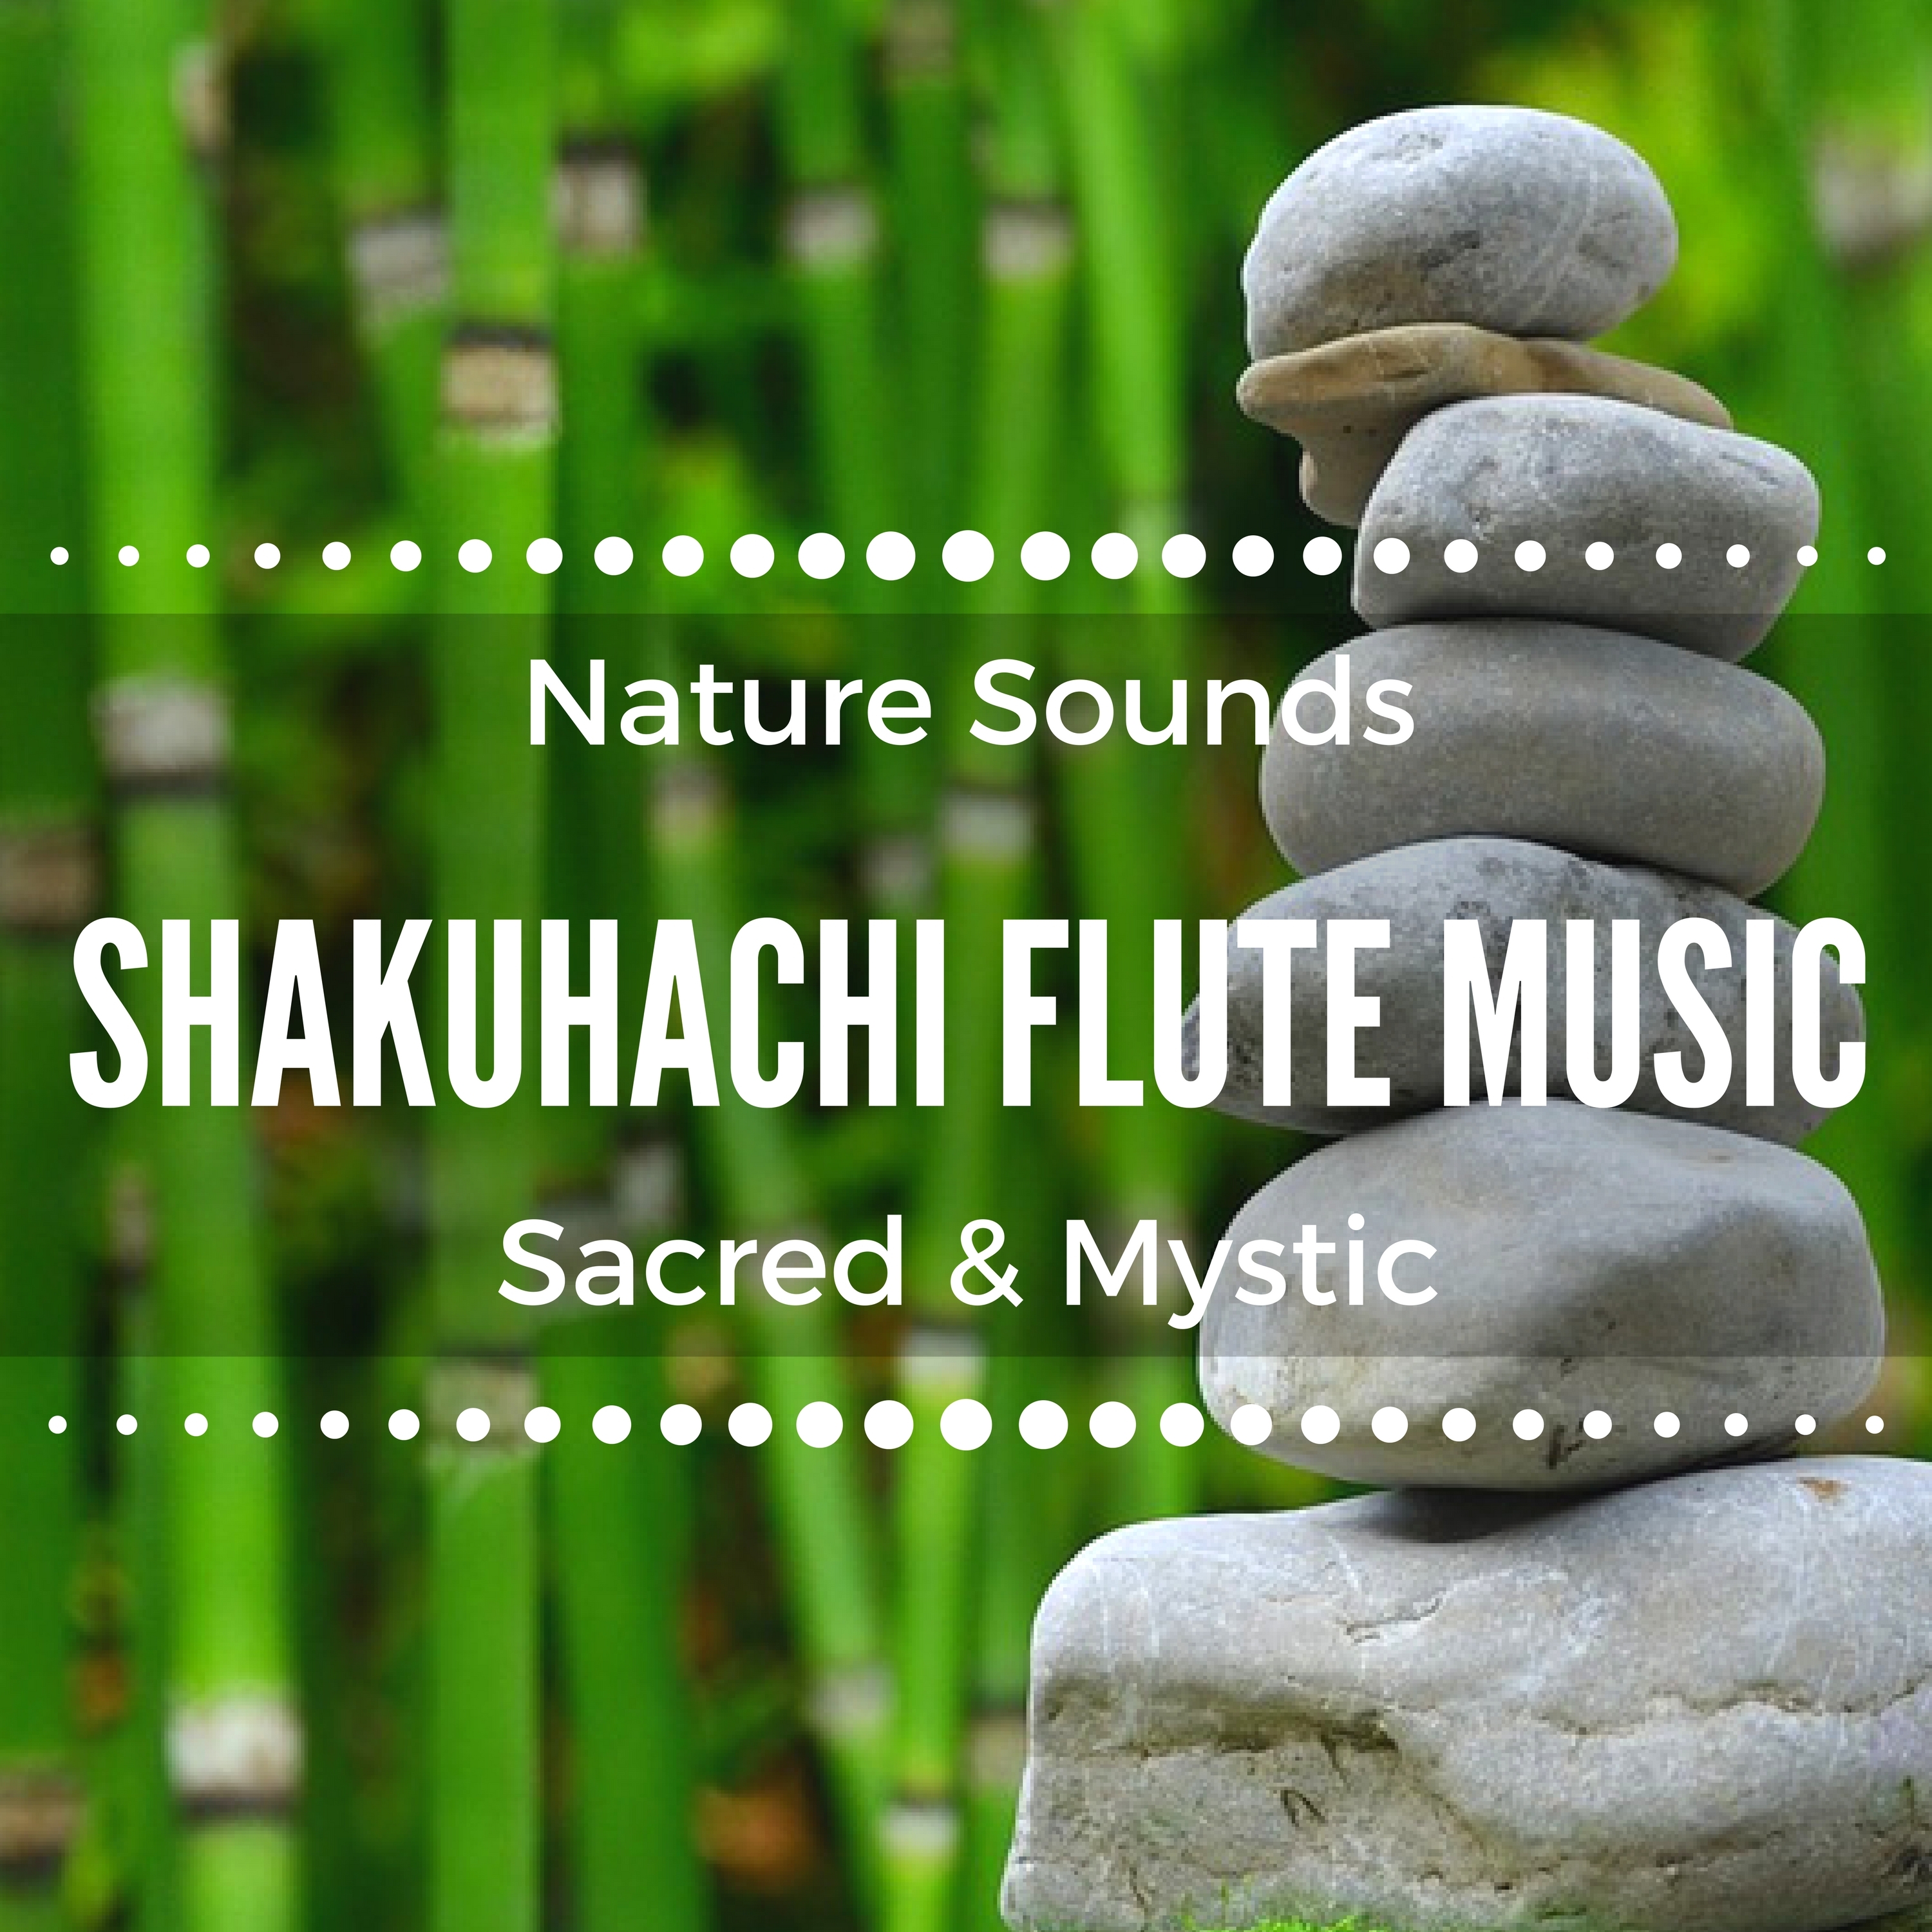 Shakuhachi Flute Music Sacred & Mystic: Meditative Flute Music with Nature Sounds for Mindfulness, Relaxation, Sleeping Troubles & Yoga